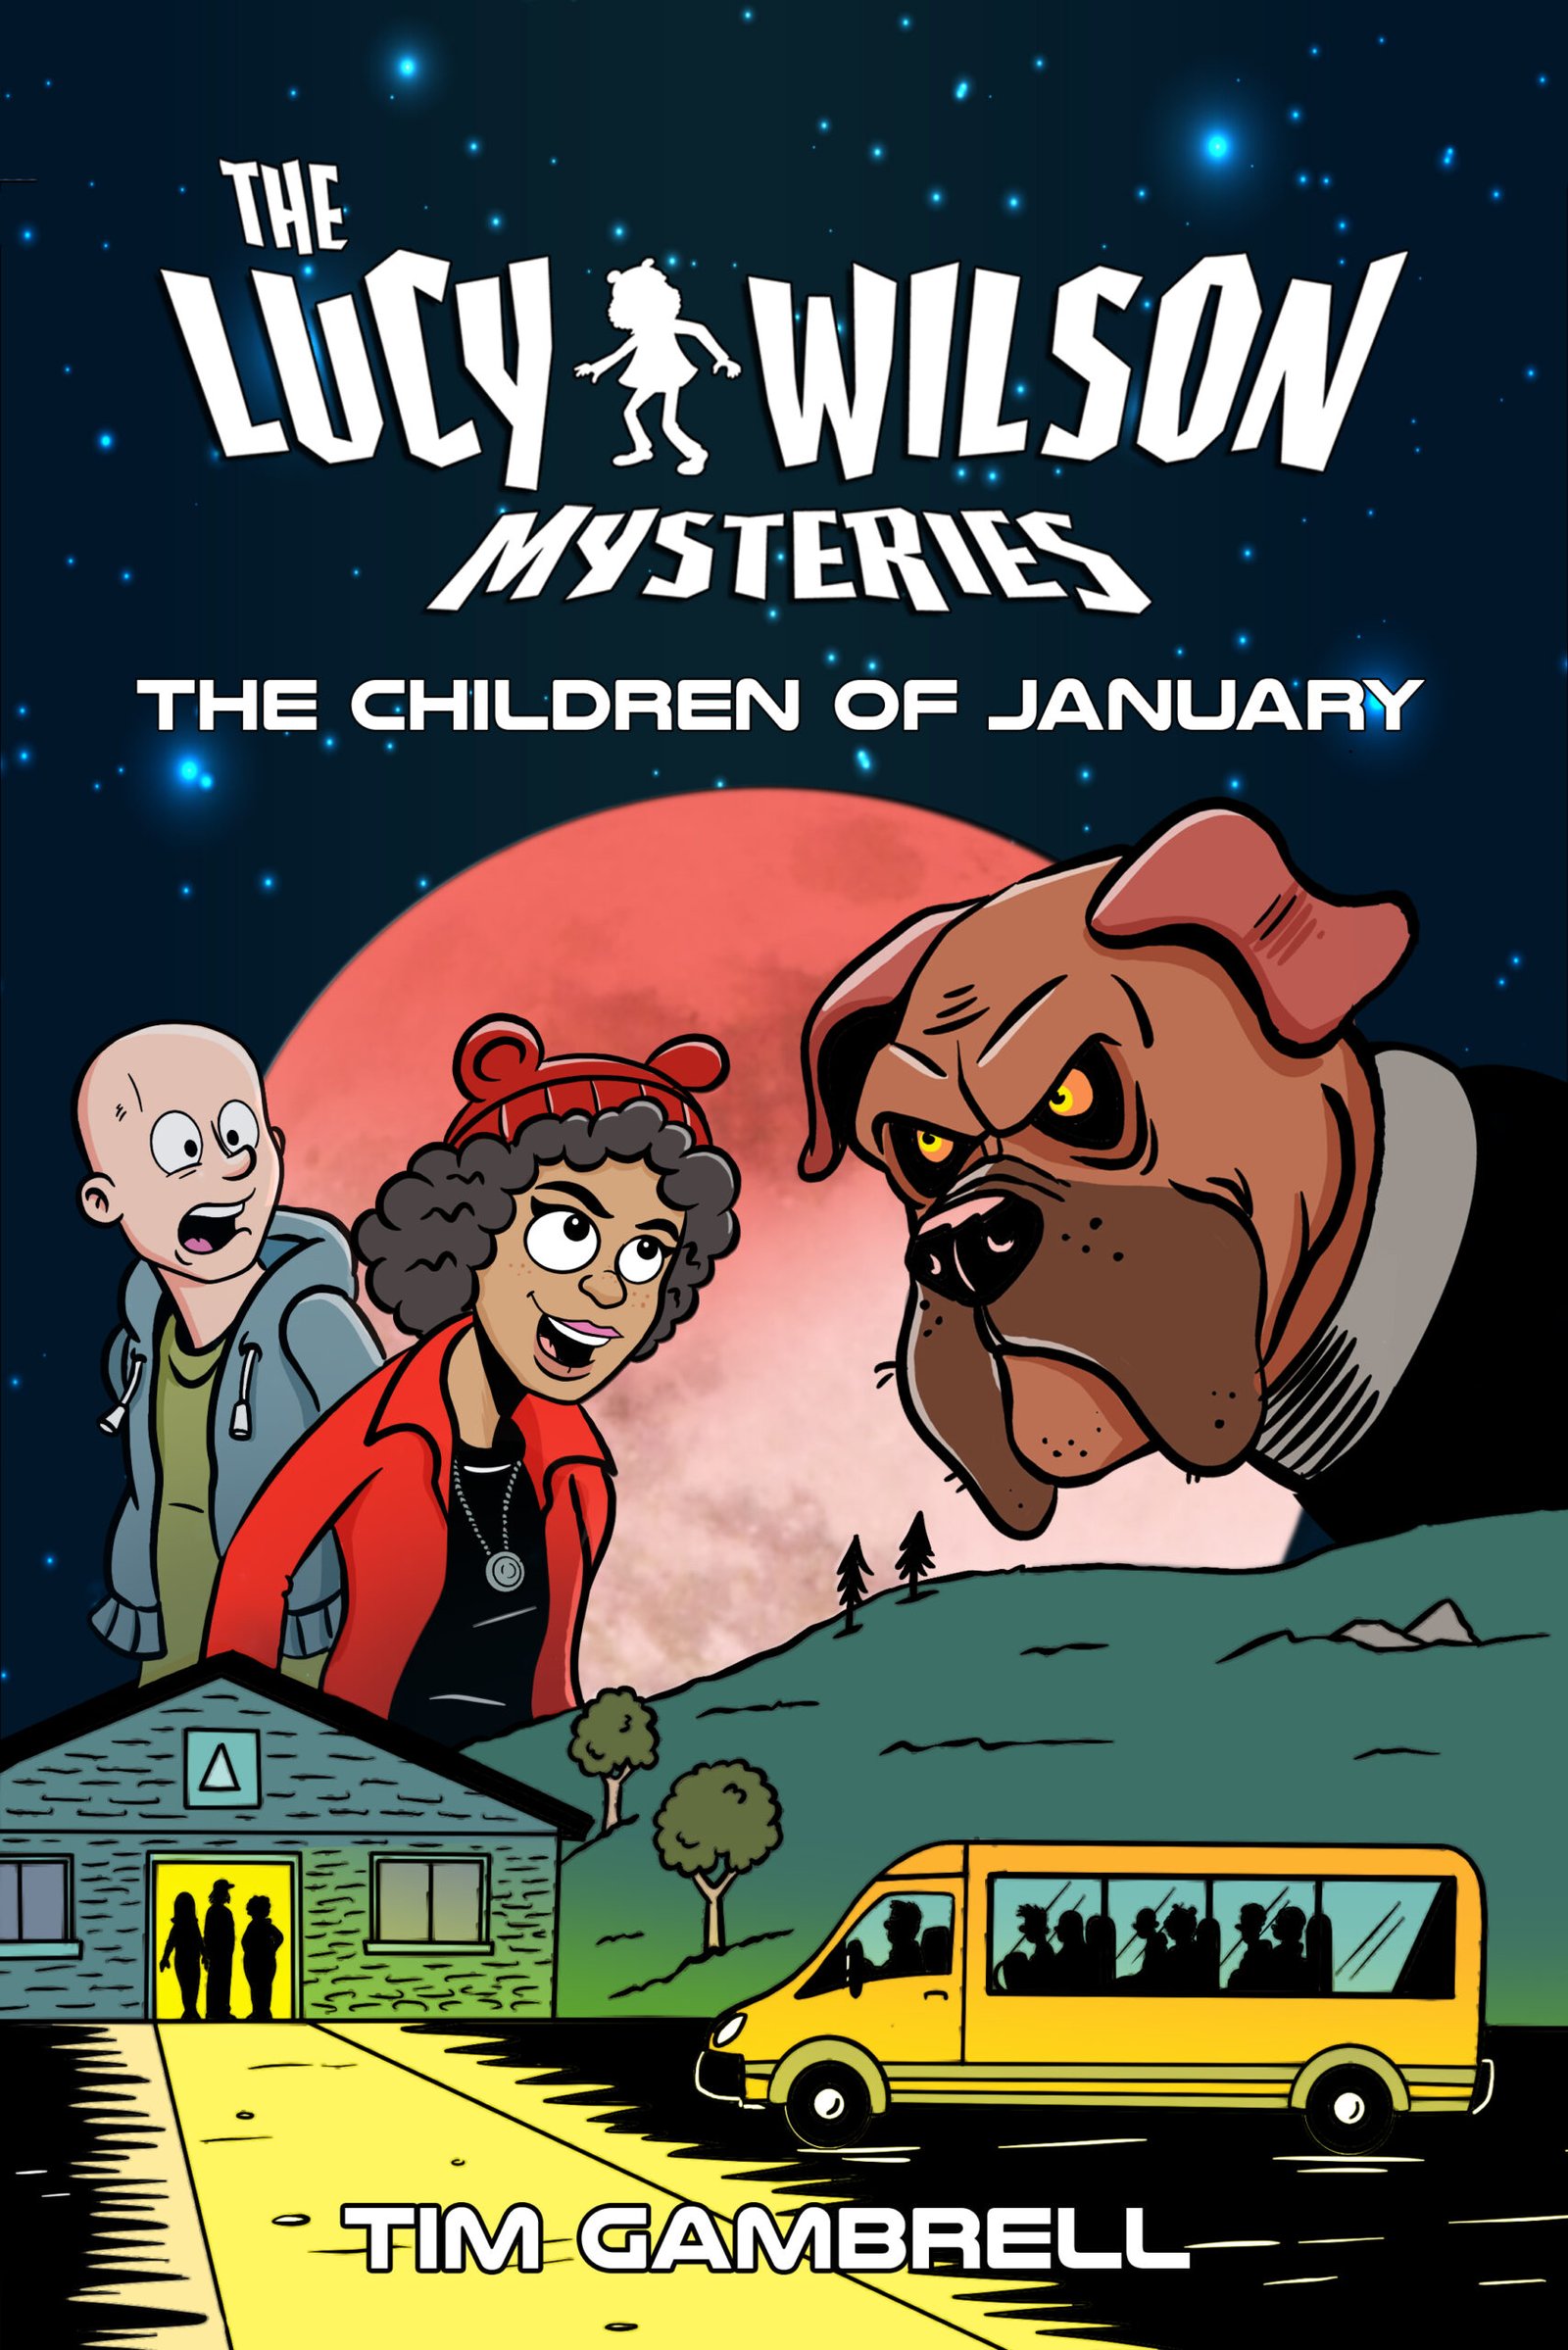 Available to Order Now: Candy Jar Books’ Lucy Wilson Mysteries — The Children of January